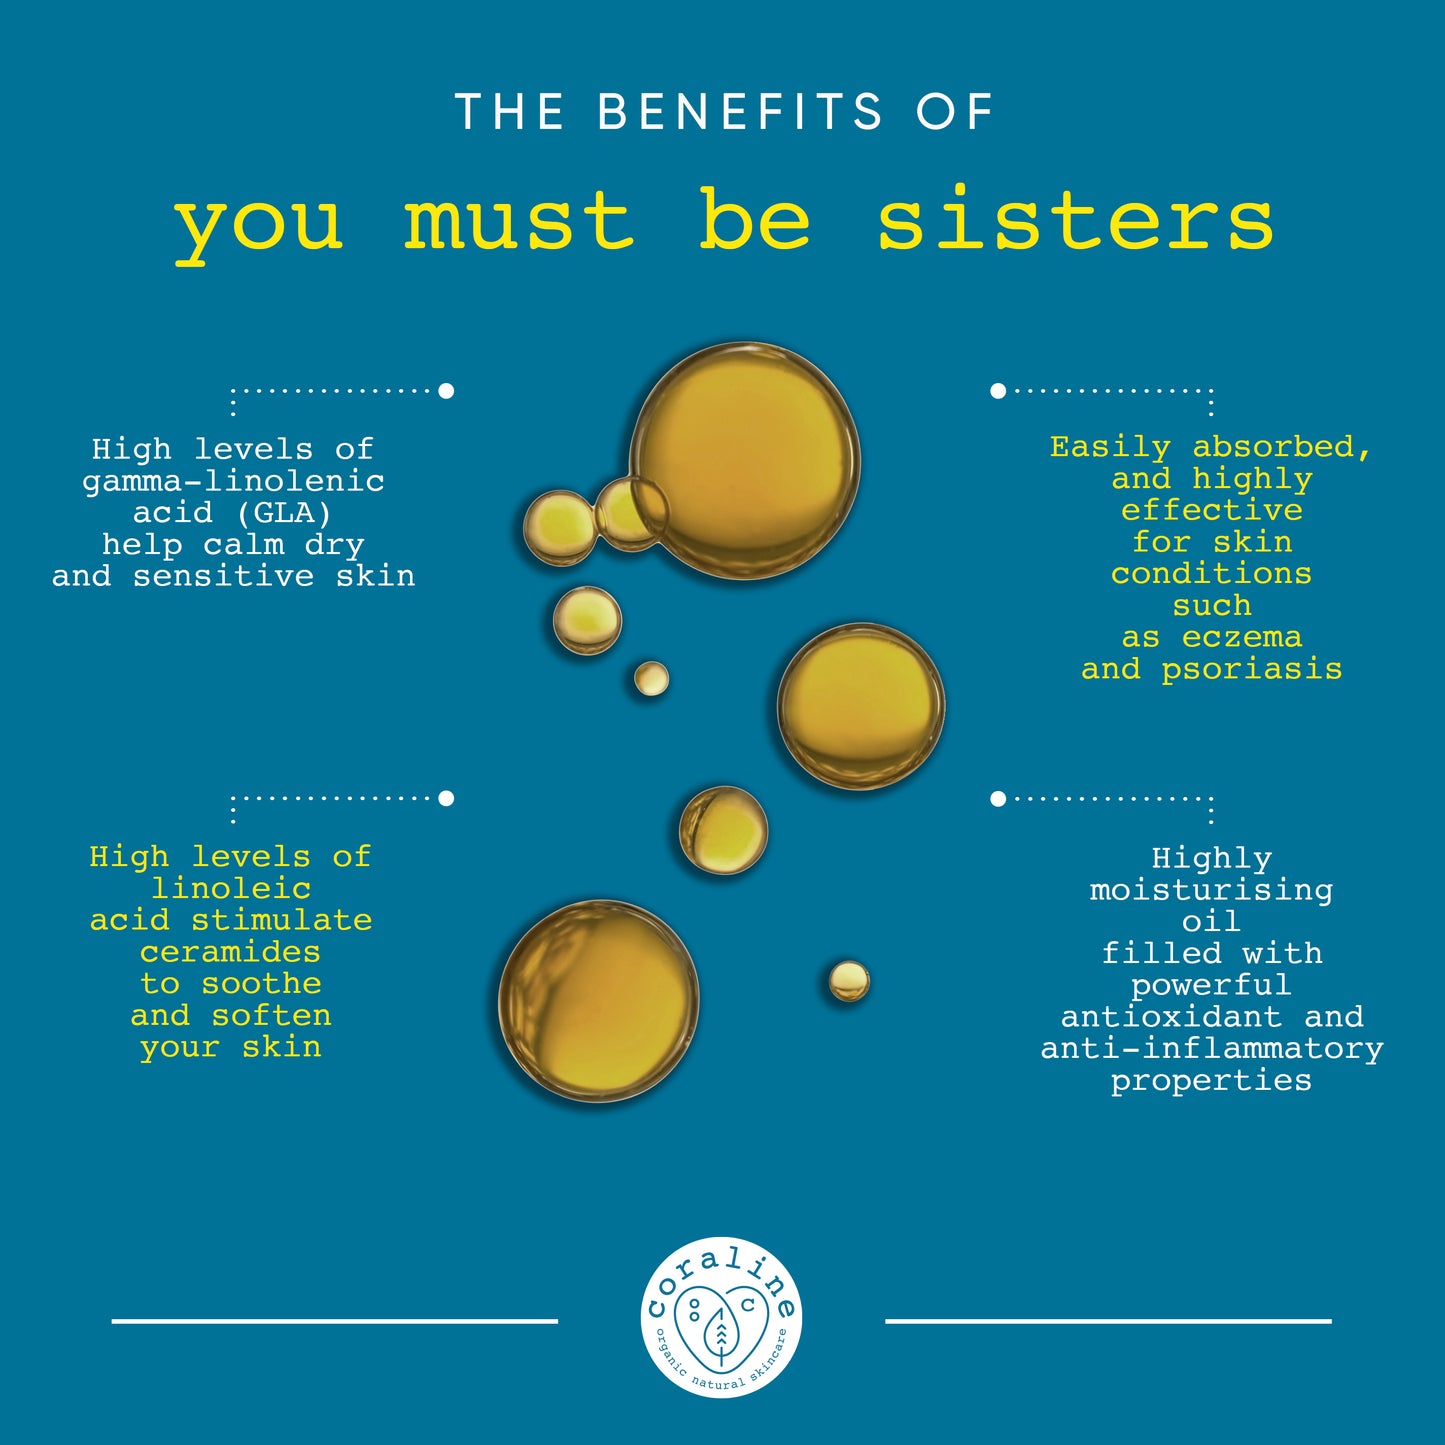 An infographic titled "The Benefits of You Must Be Sisters" shows yellow oil droplets. It highlights the benefits including high levels of gamma-linolenic acid, linoleic acid, easy absorption for skin conditions, and highly moisturizing oil with antioxidants.